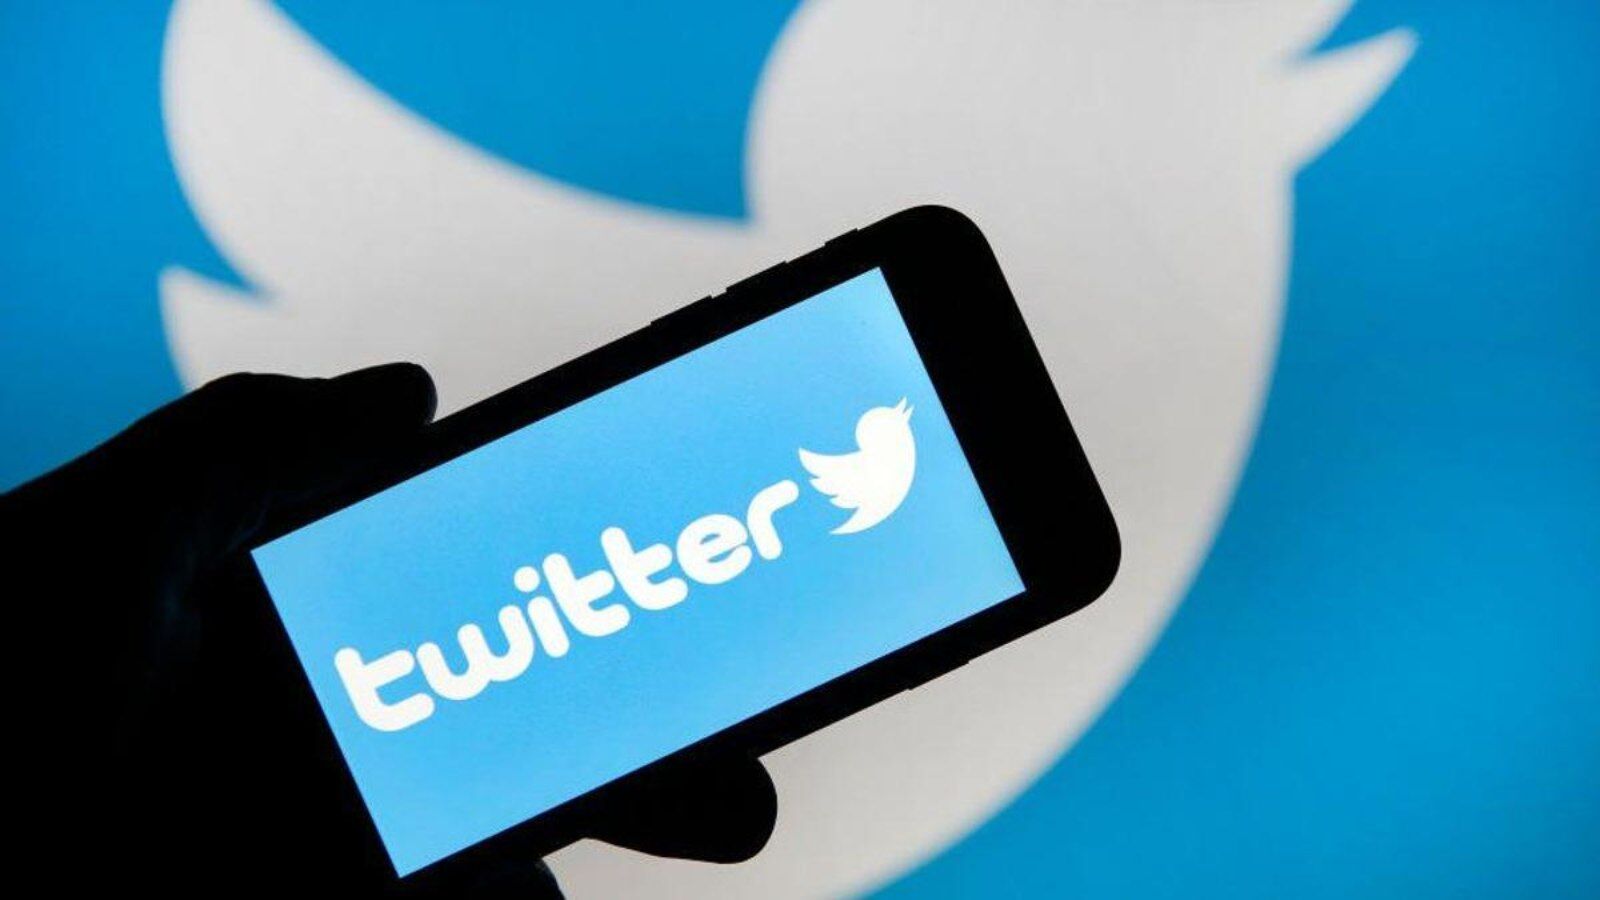 New Twitter Update: Twitter’s new update will be able to watch videos like YouTube and Insta